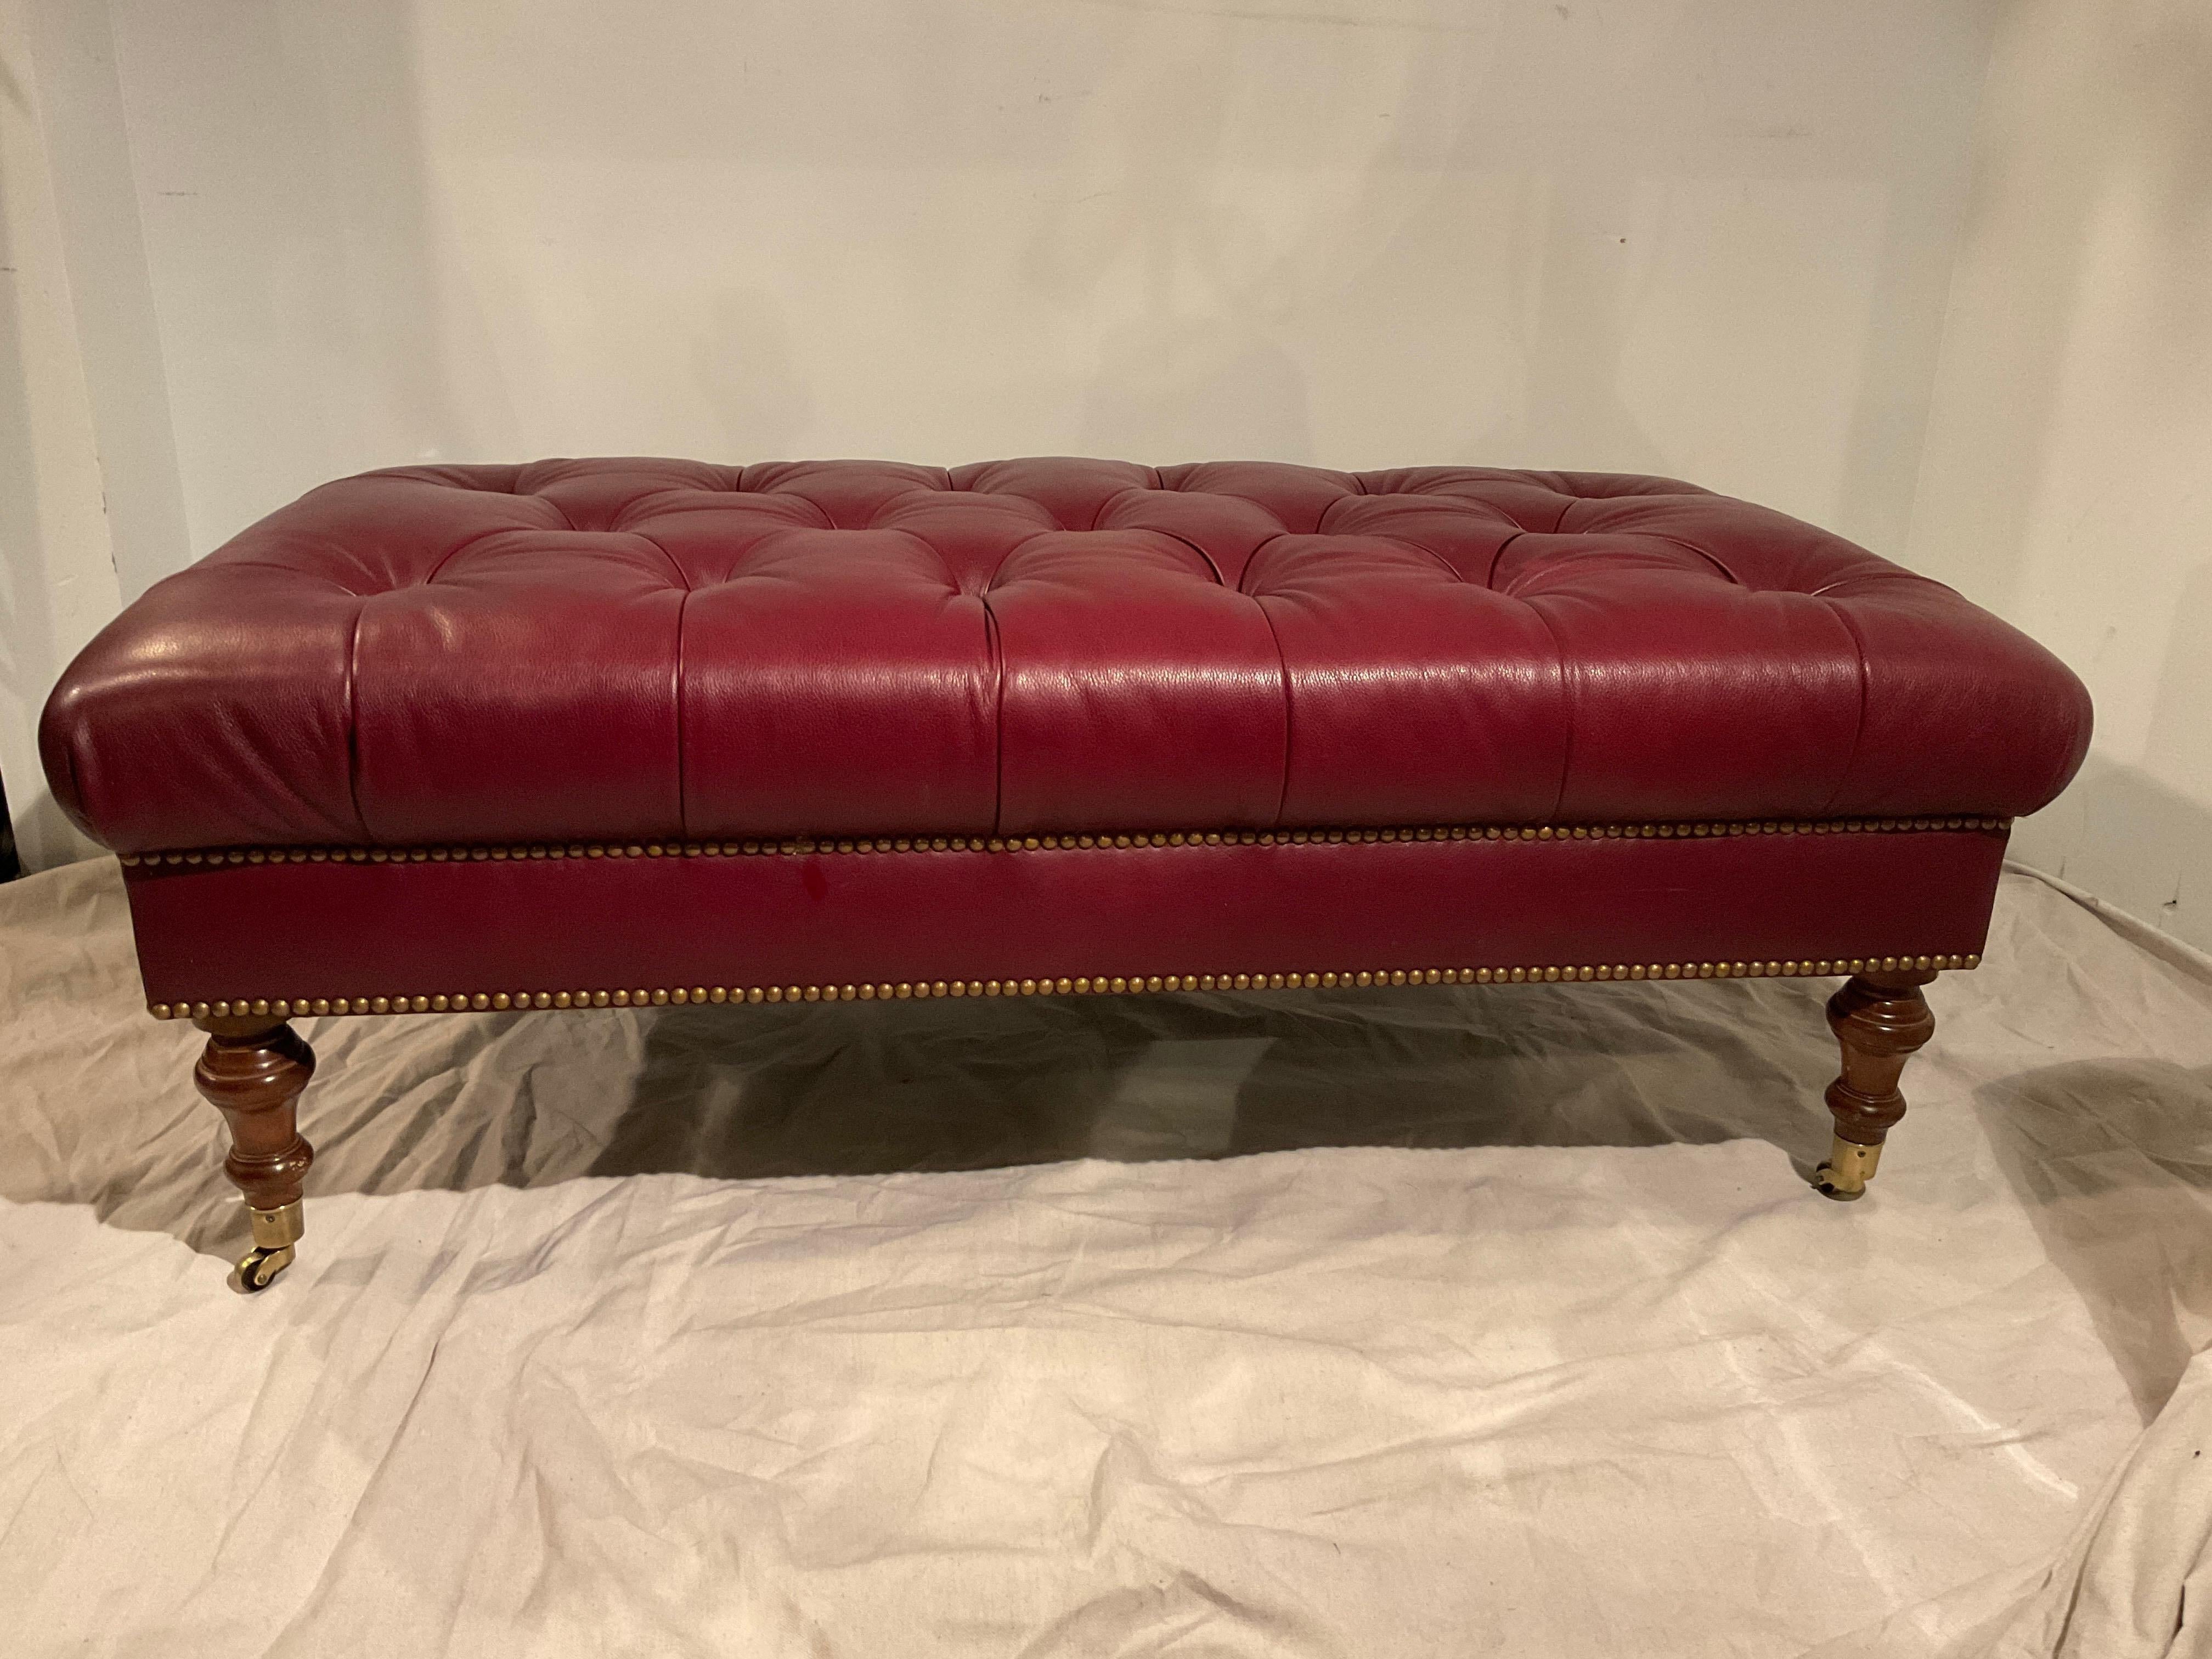 Edward Ferrell Tufted Red Leather Ottoman On Brass Casters In Good Condition For Sale In Tarrytown, NY